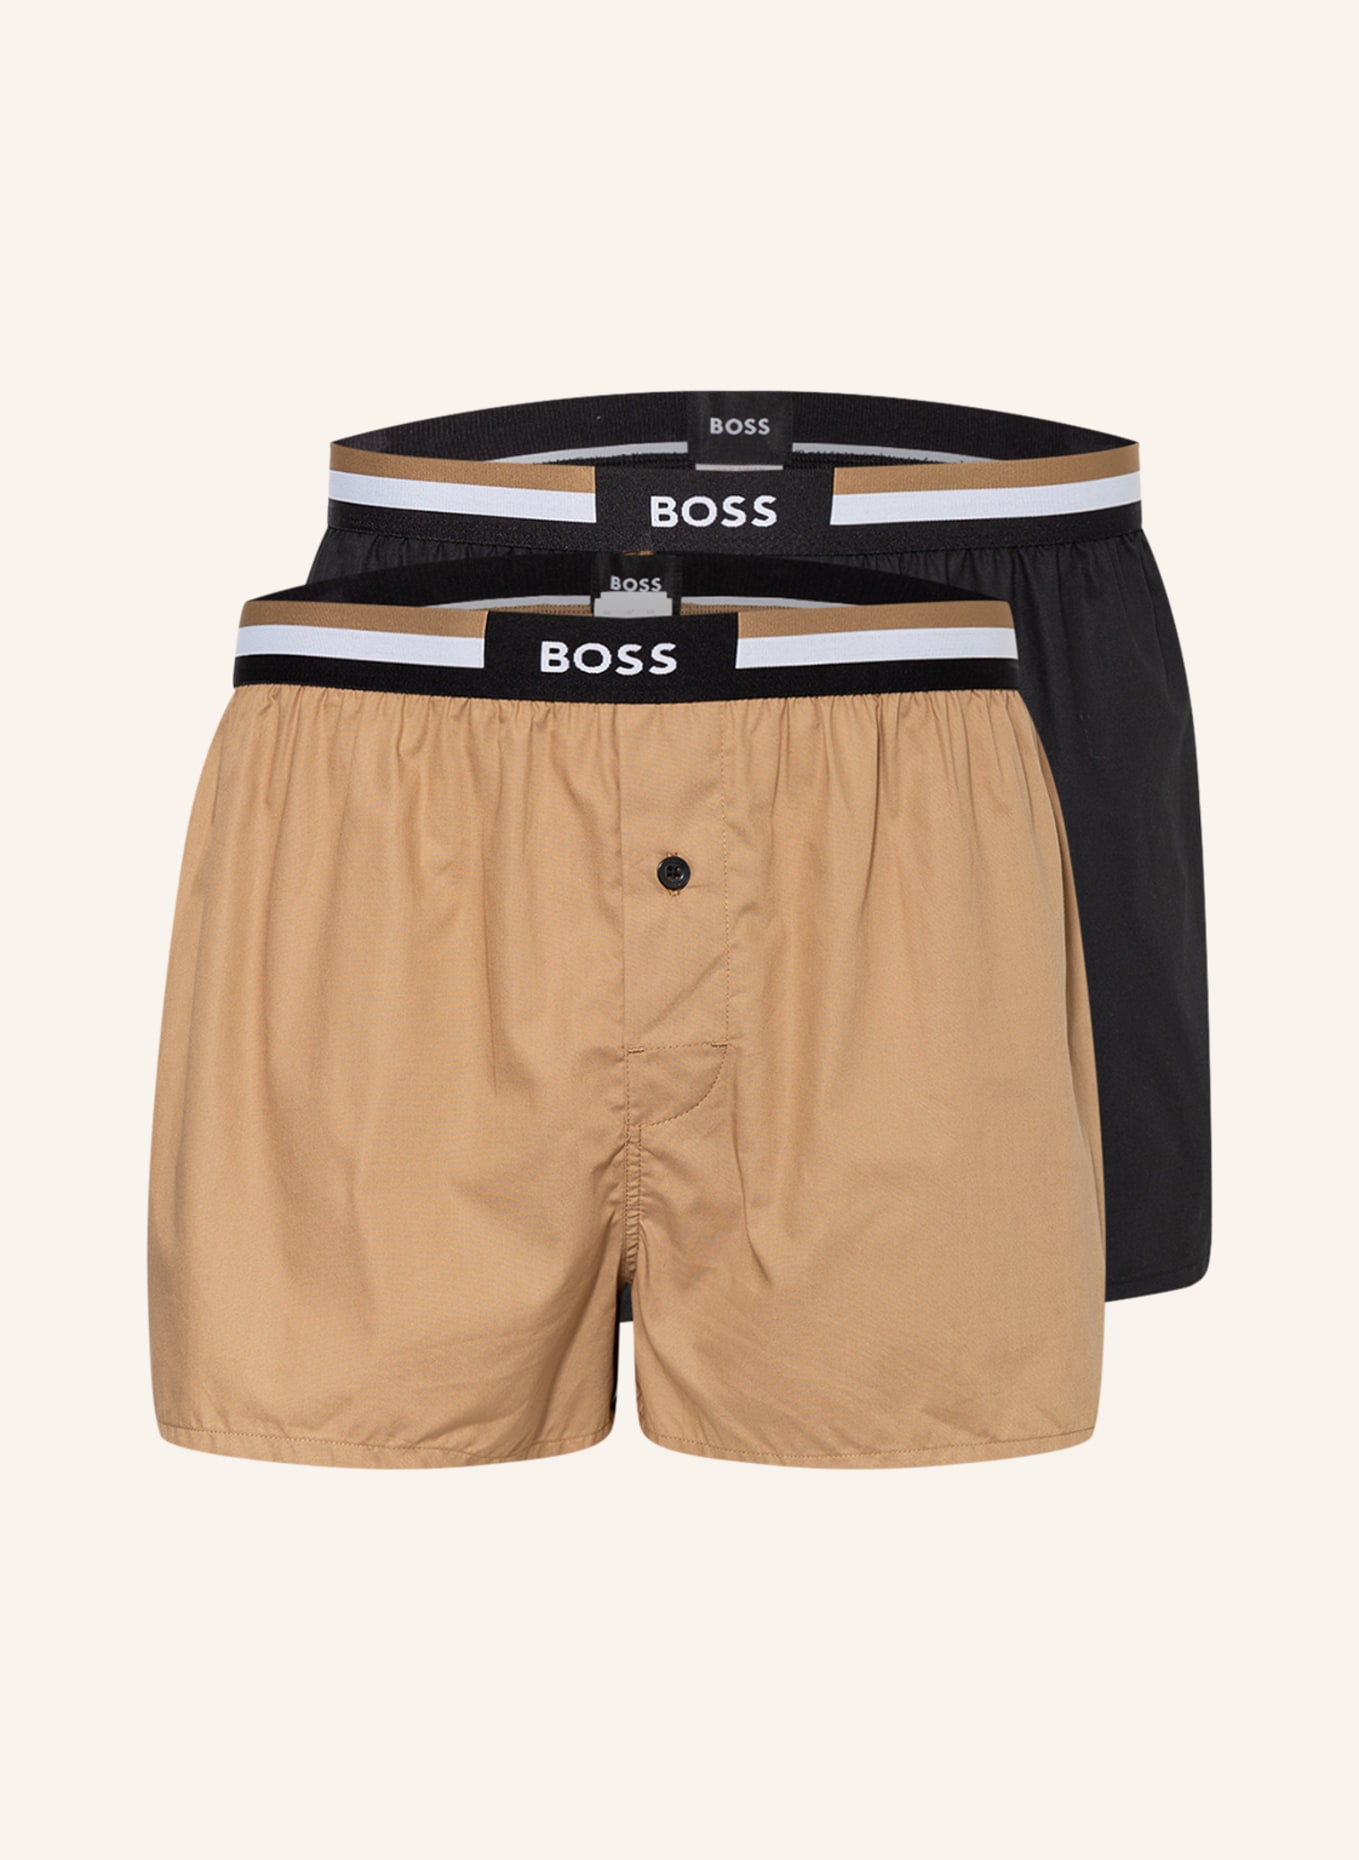 BOSS 2-pack of woven boxer shorts in beige/ black